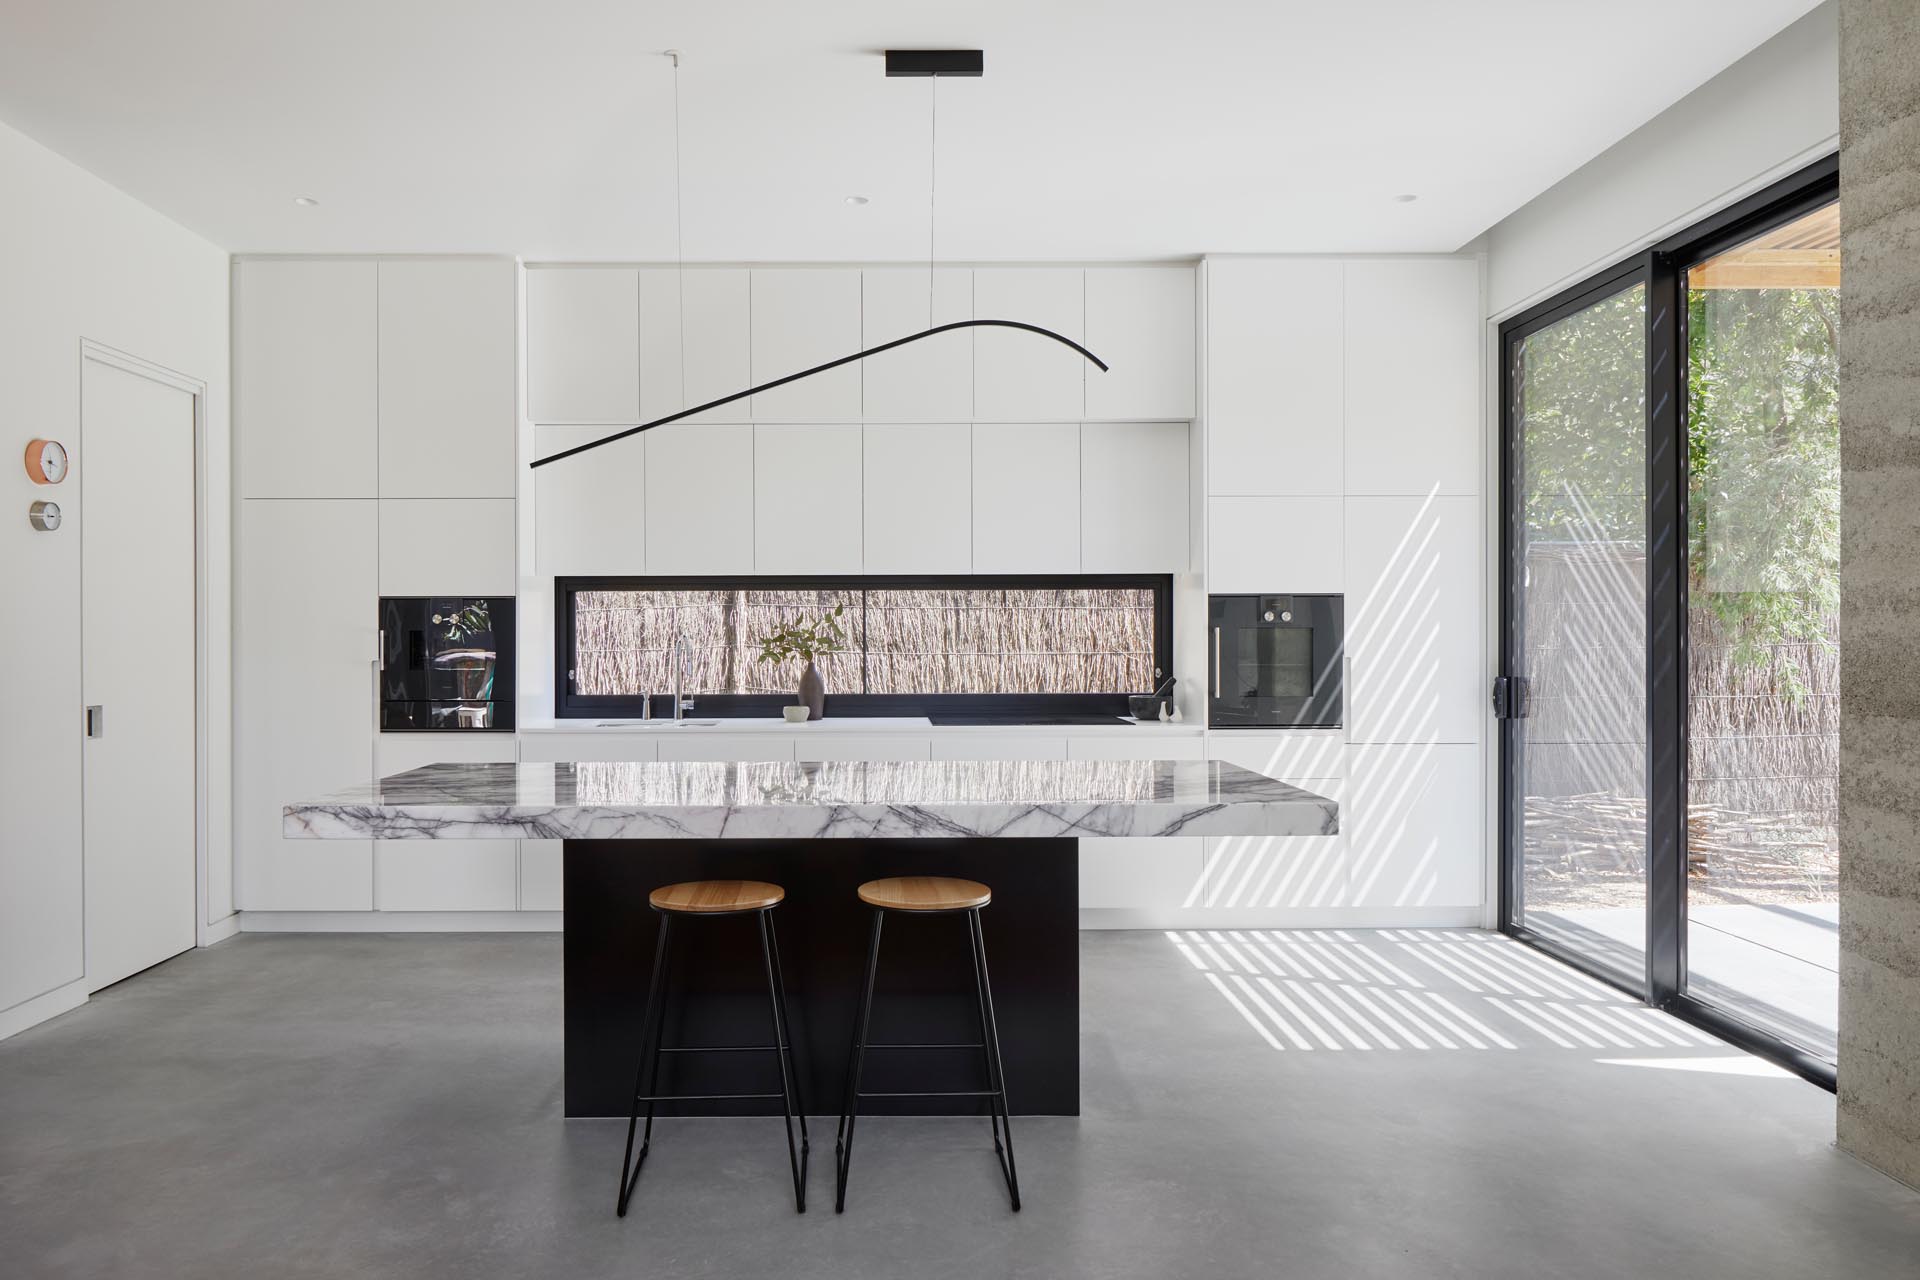 In this modern kitchen, minimalist white cabinets with an integrated fridge and freezer, contrast the built-in appliances, horizontal black window frame, and the black island base. The island has a thick marble countertop, while pure white countertops are featured along the wall.